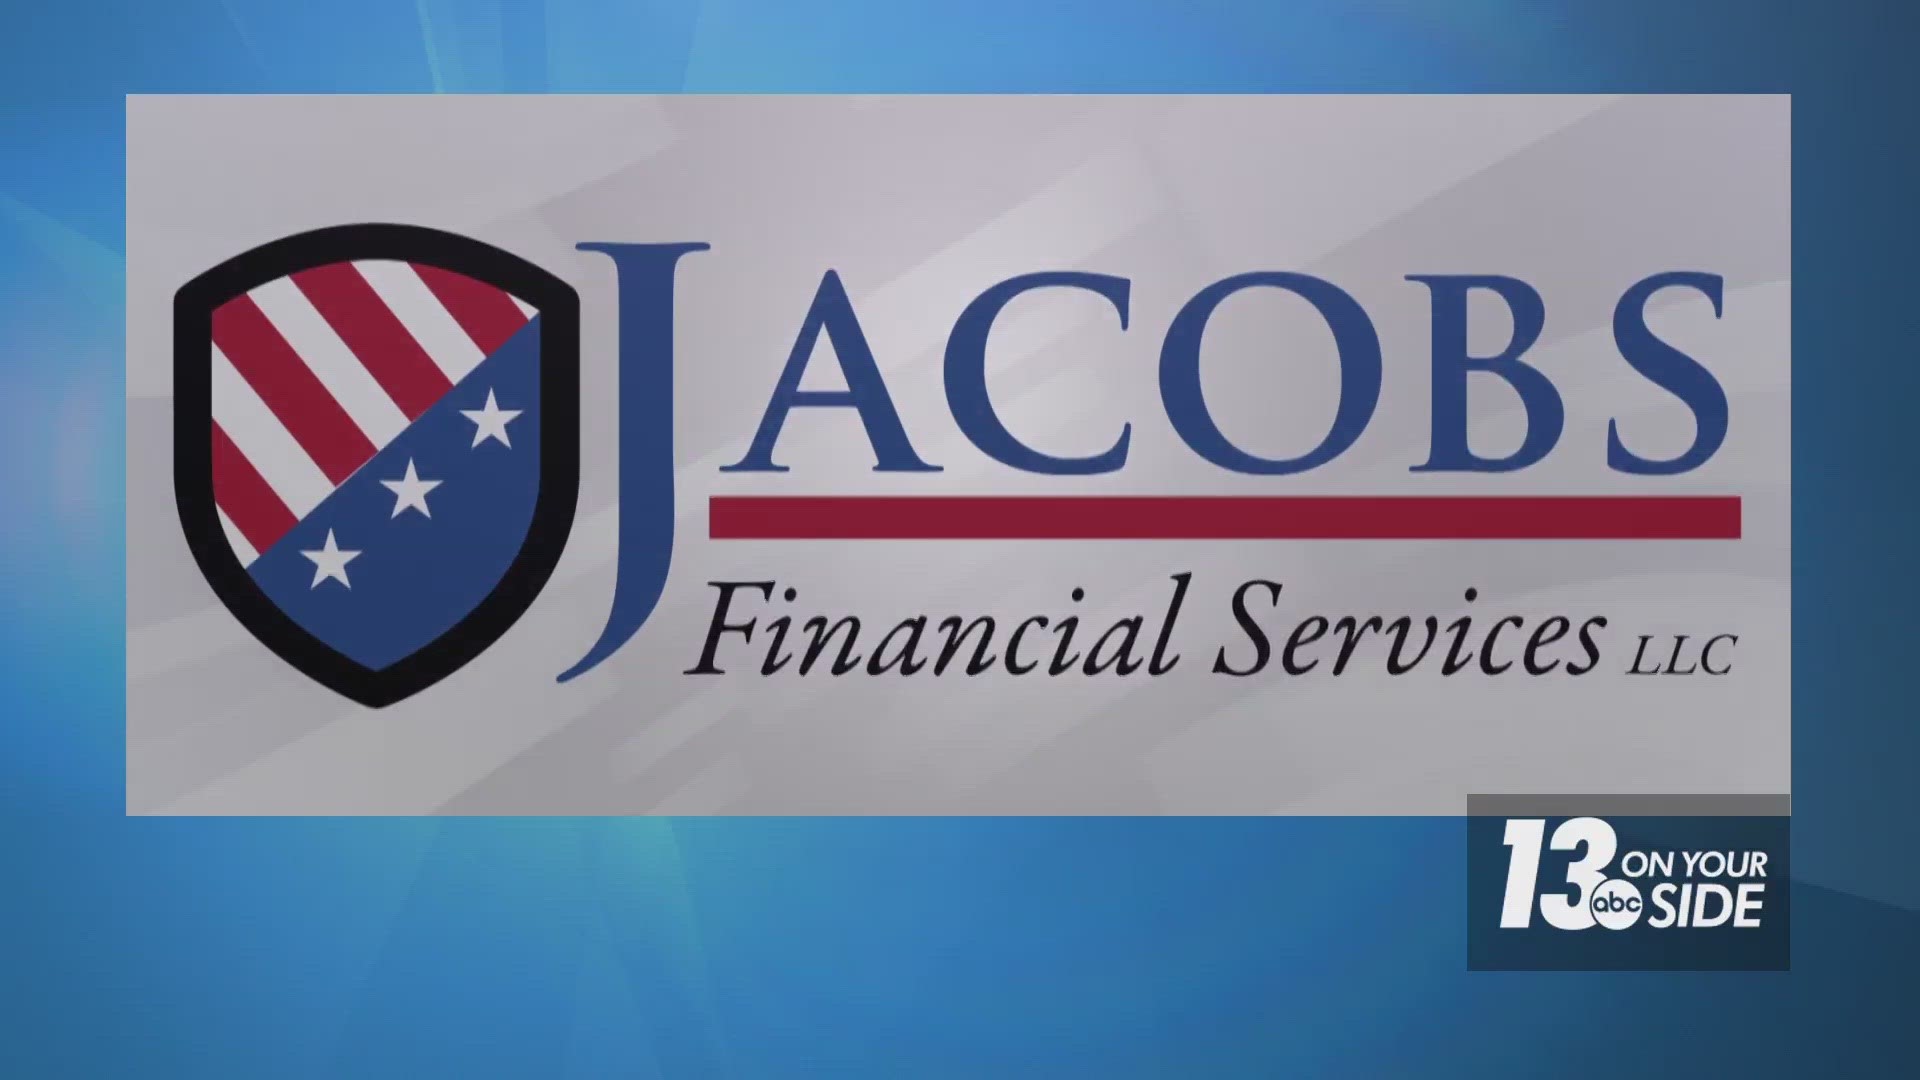 But as 65 approaches, it’s time to shift your priorities, and we asked Tom Jacobs from Jacobs Financial Services to explain how.